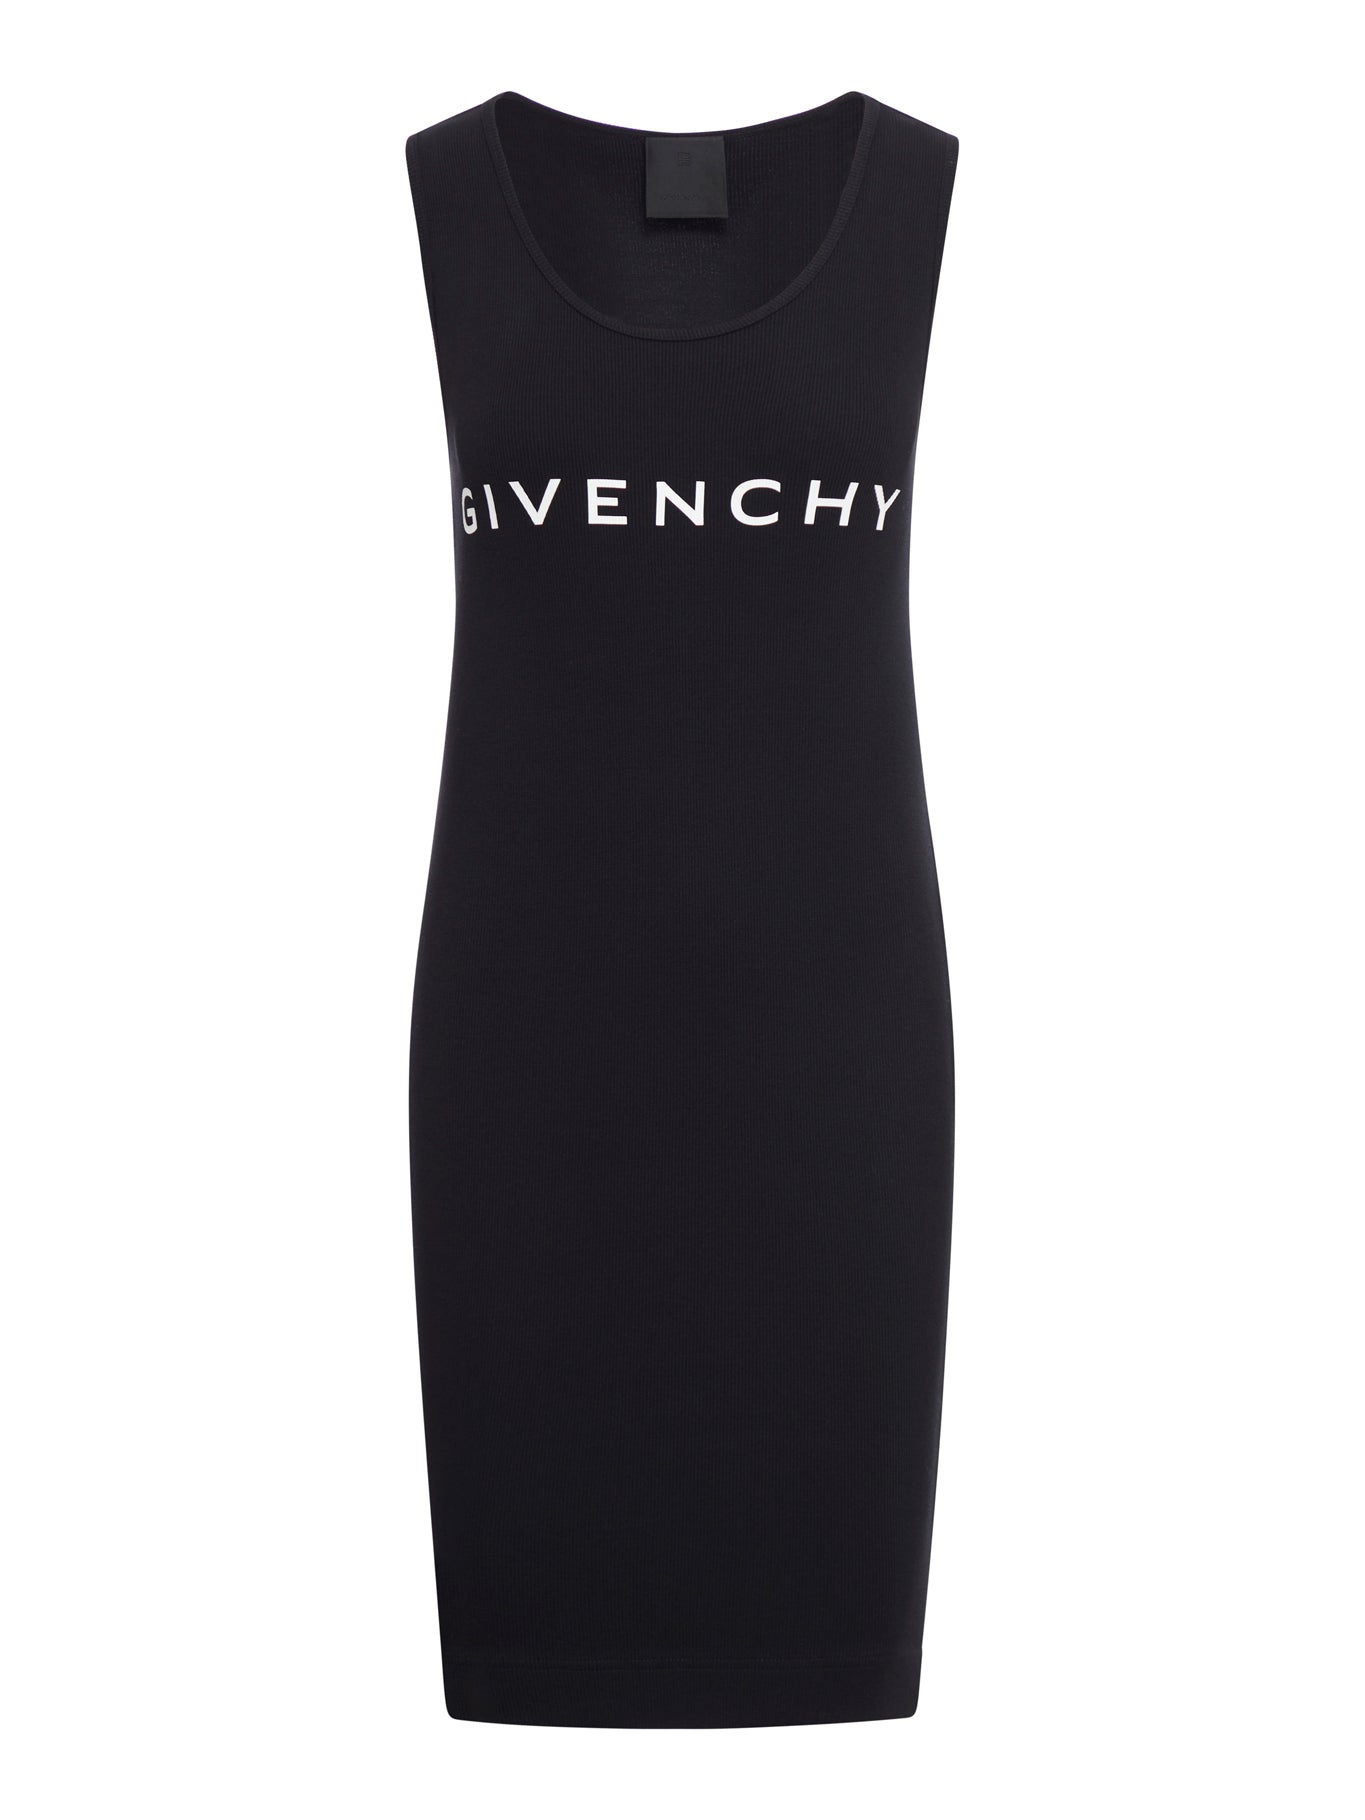 GIVENCHY Archetype tank dress in jersey